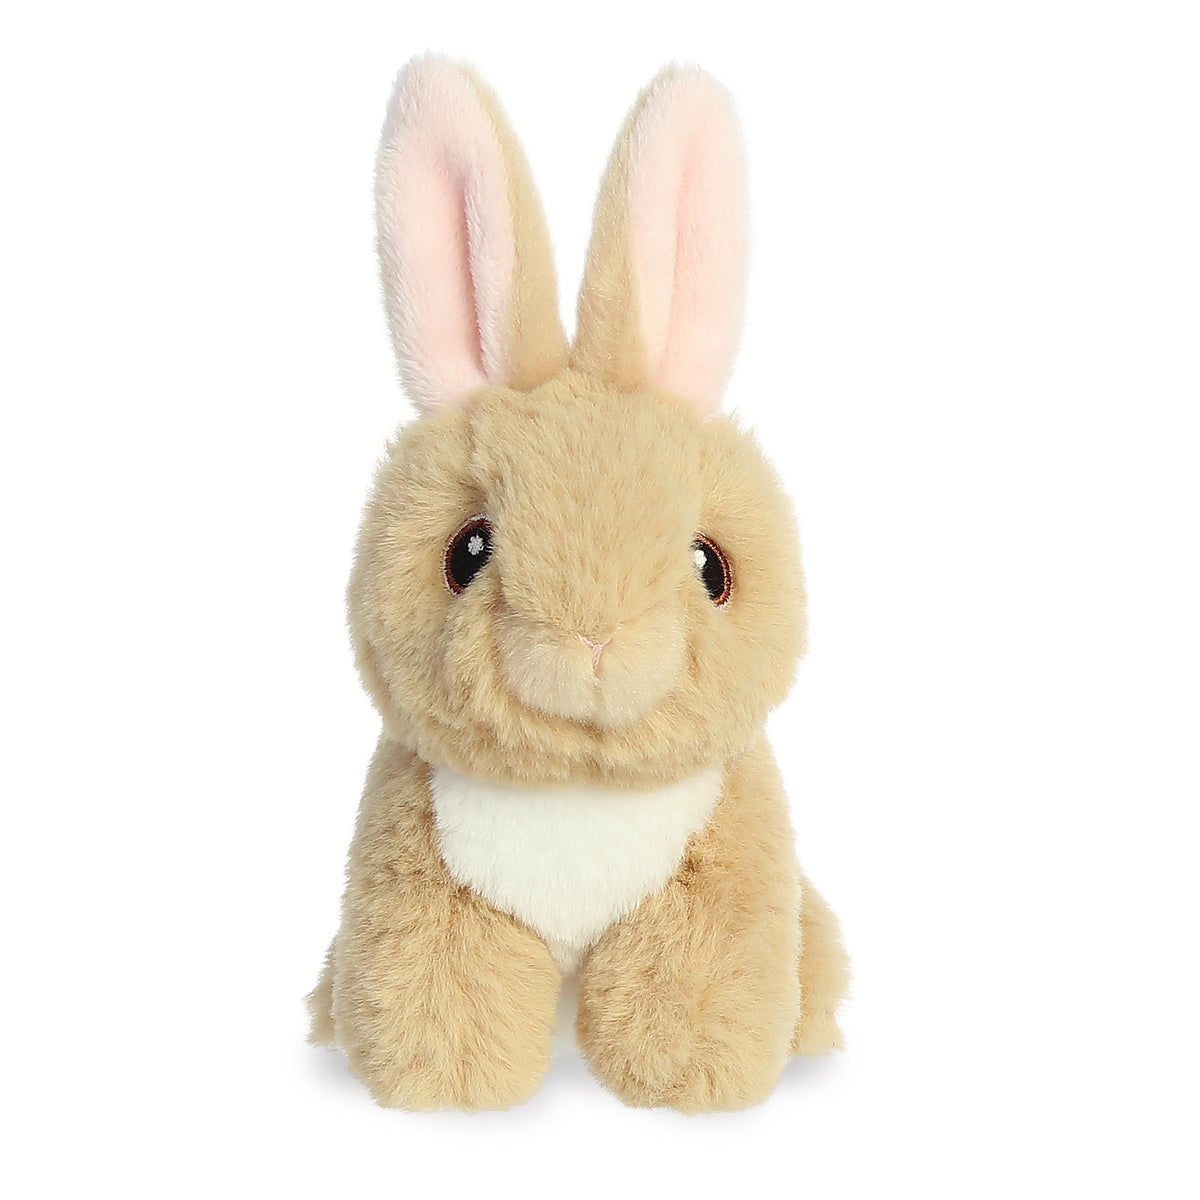 Darling mini bunny plush with a sweet tan coat, long pink ears, adorable embroidered eyes, and an eco-nation tag